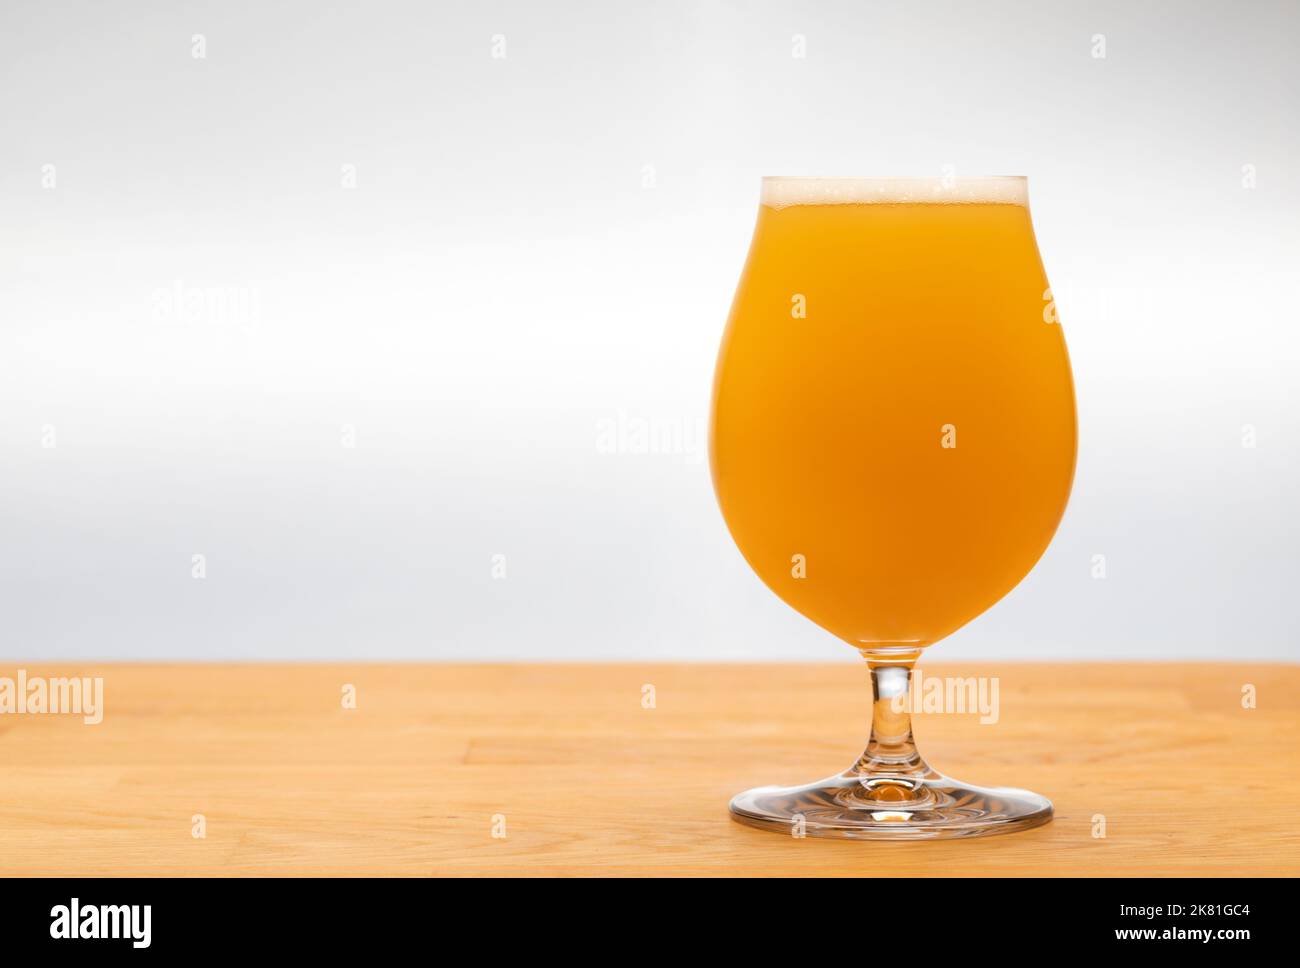 Full snifter glass of hazy New England IPA (NEIPA) pale ale beer on wooden table with grey background Stock Photo